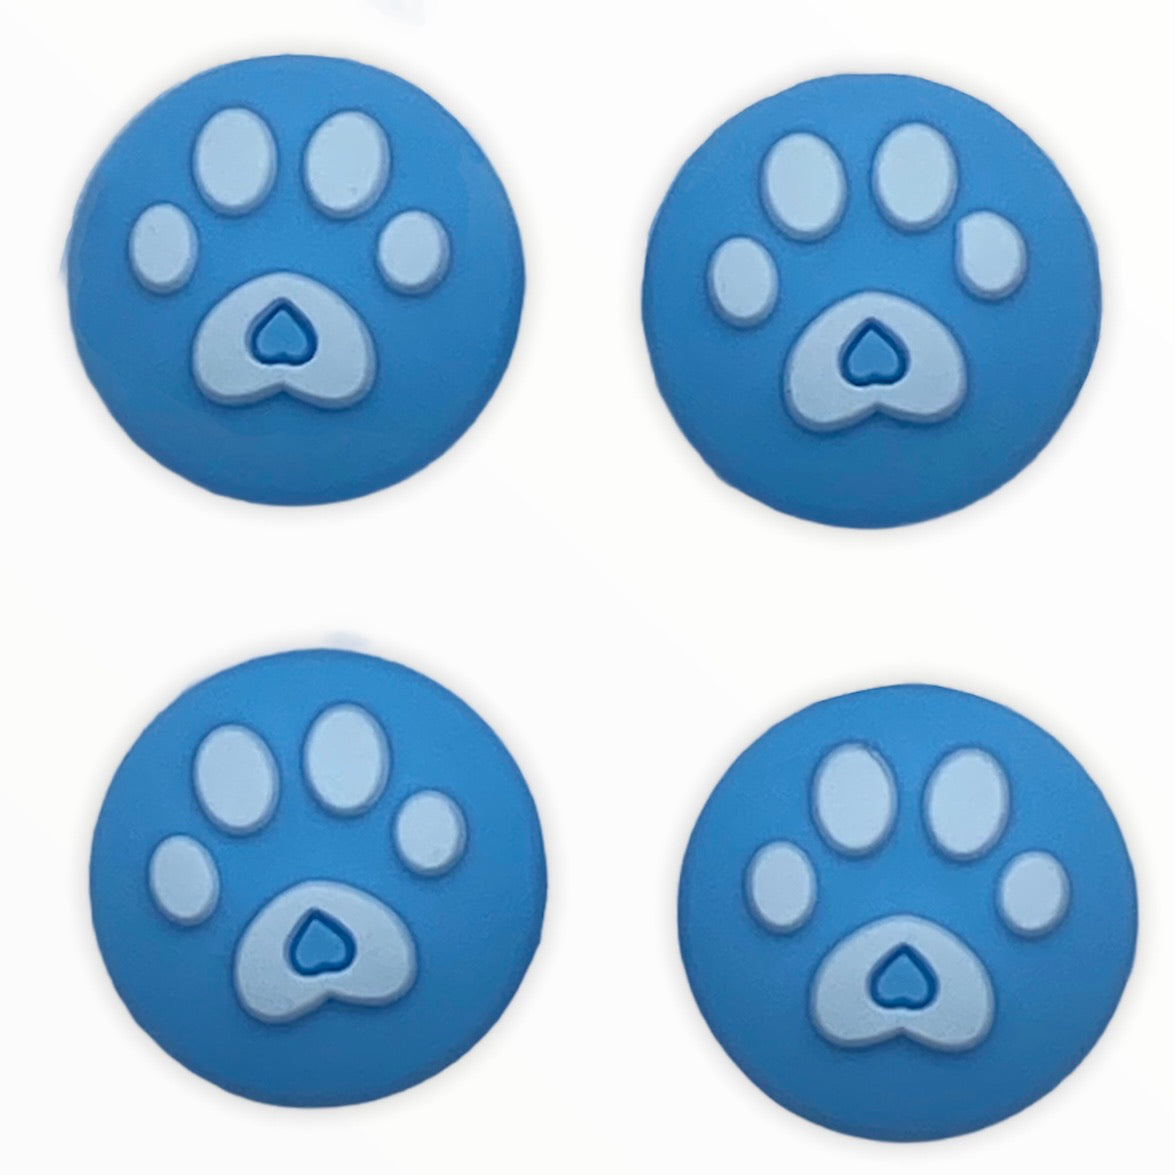 JenDore Blue Heart 4Pcs Paws Silicone Thumb Grip Caps for Nintendo Switch